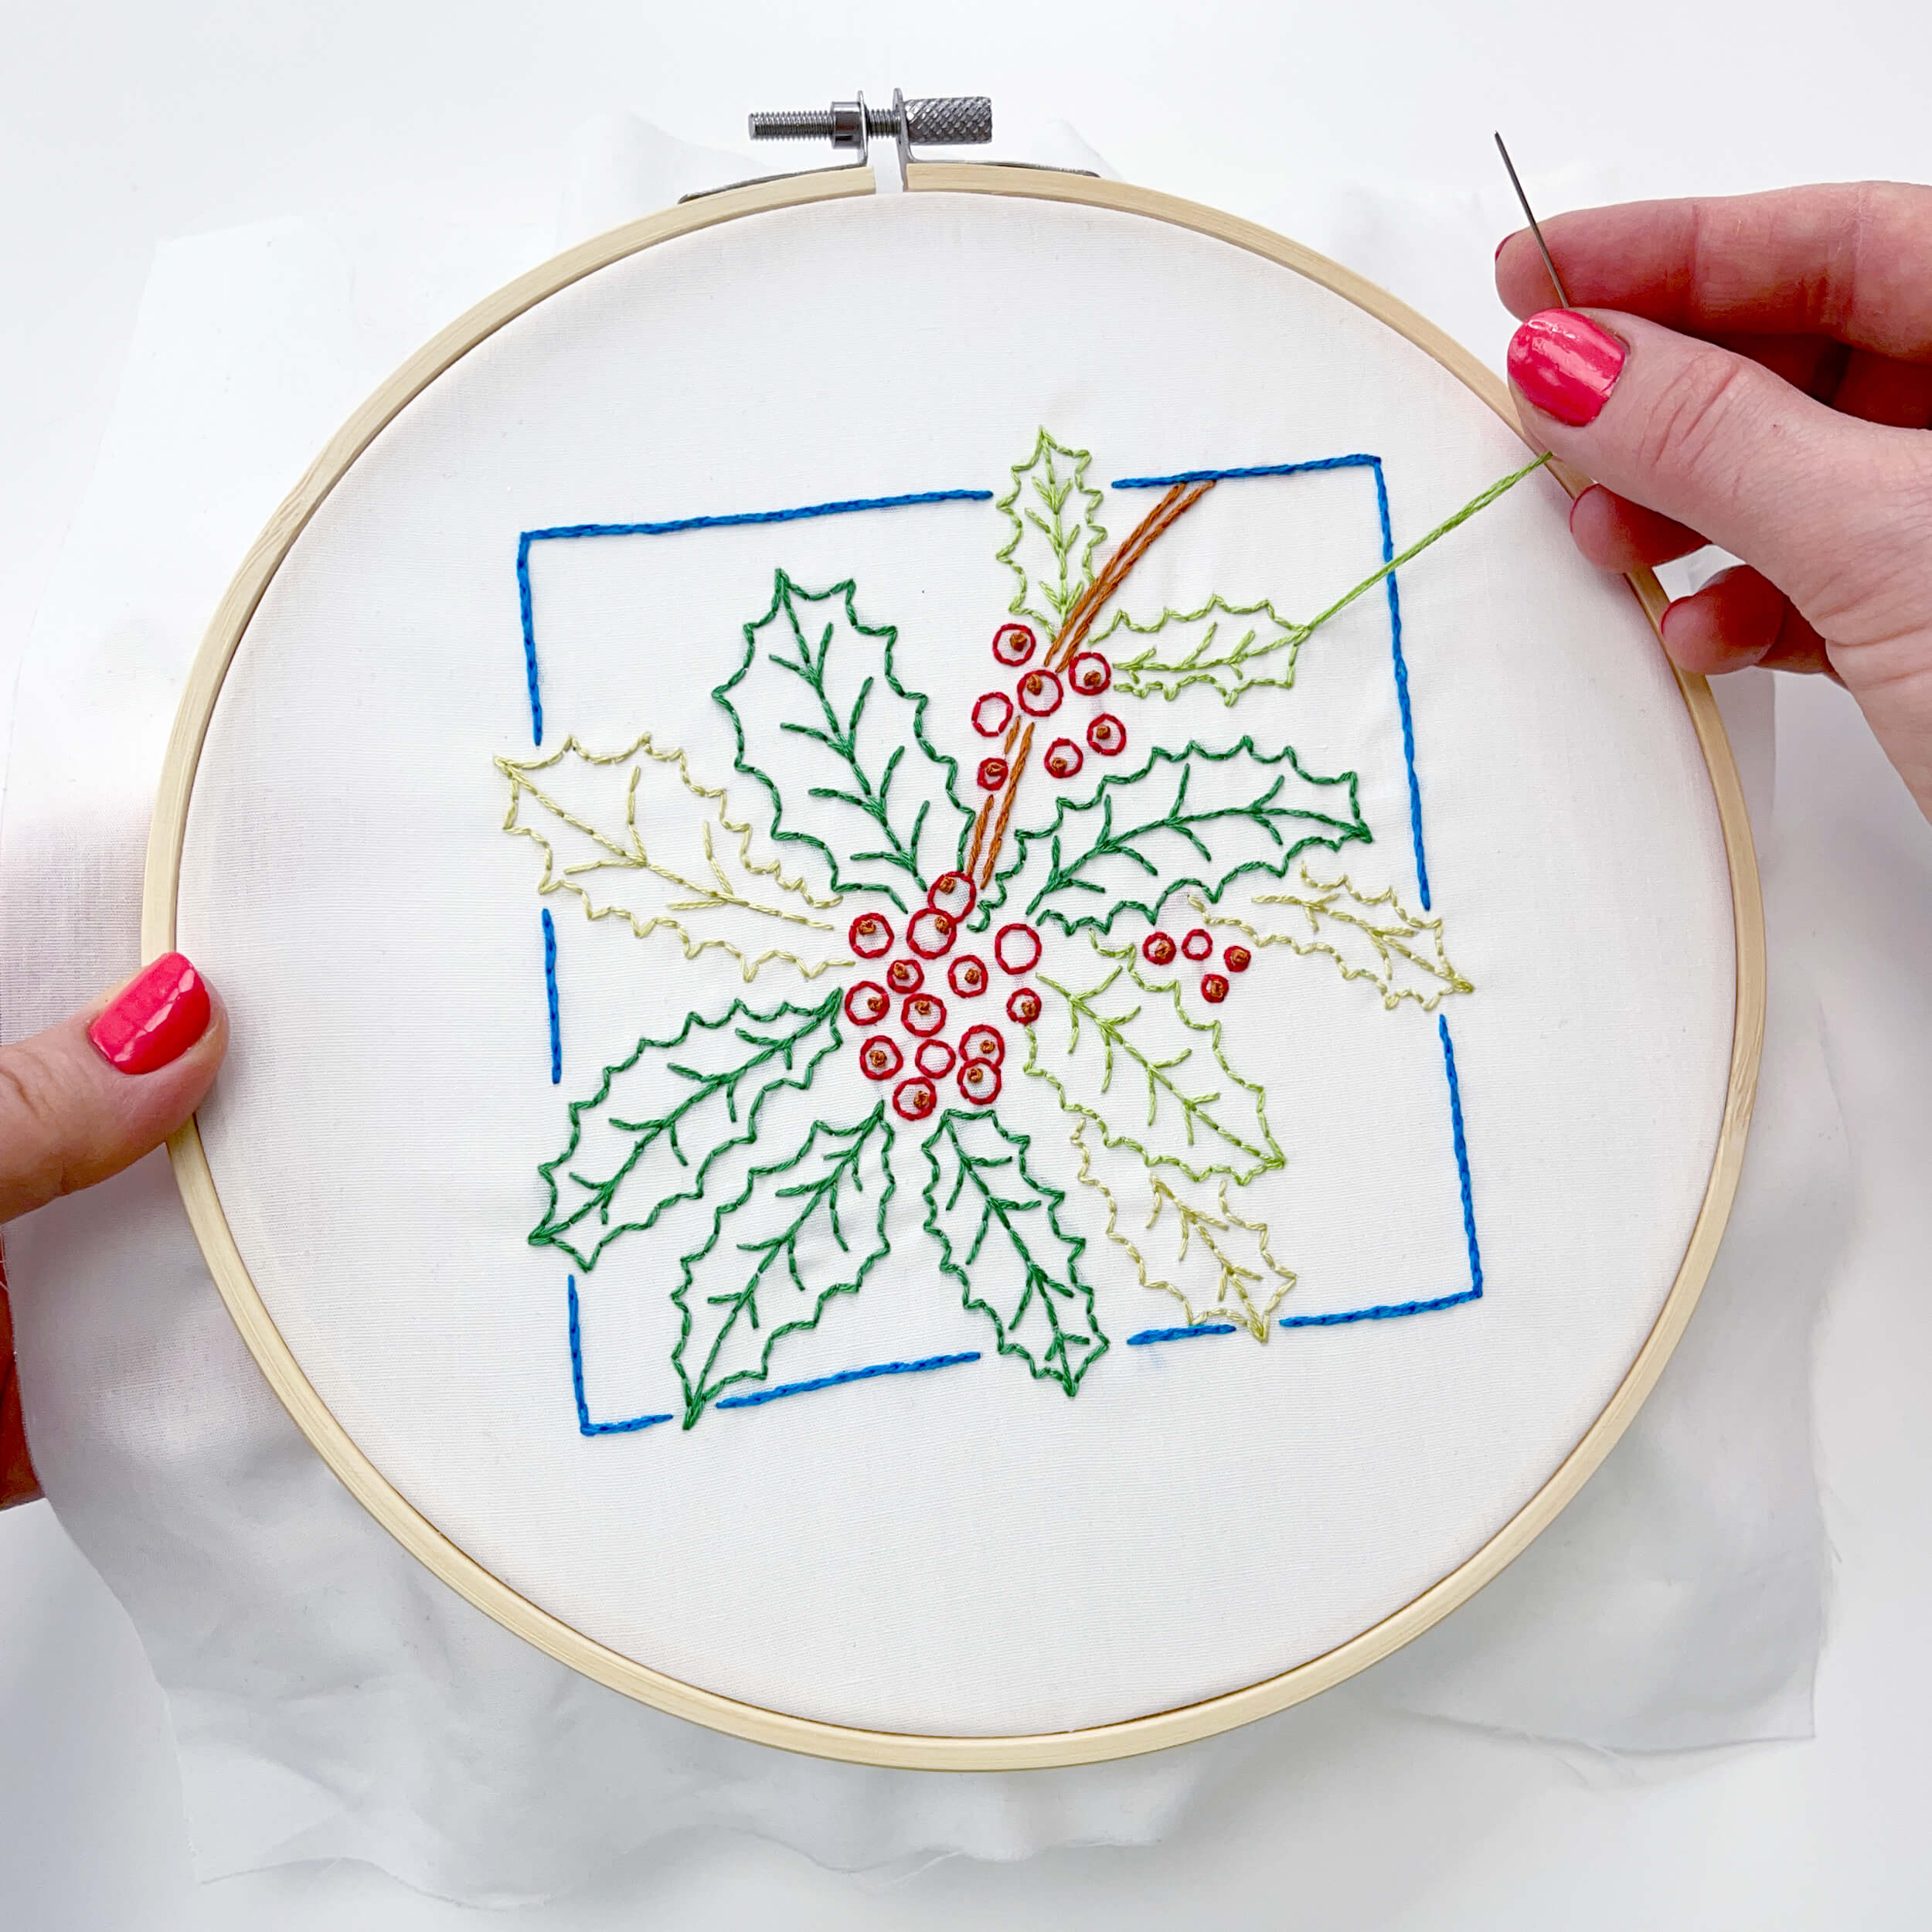 Hand stitching the green leaf in the Holly embroidery pattern